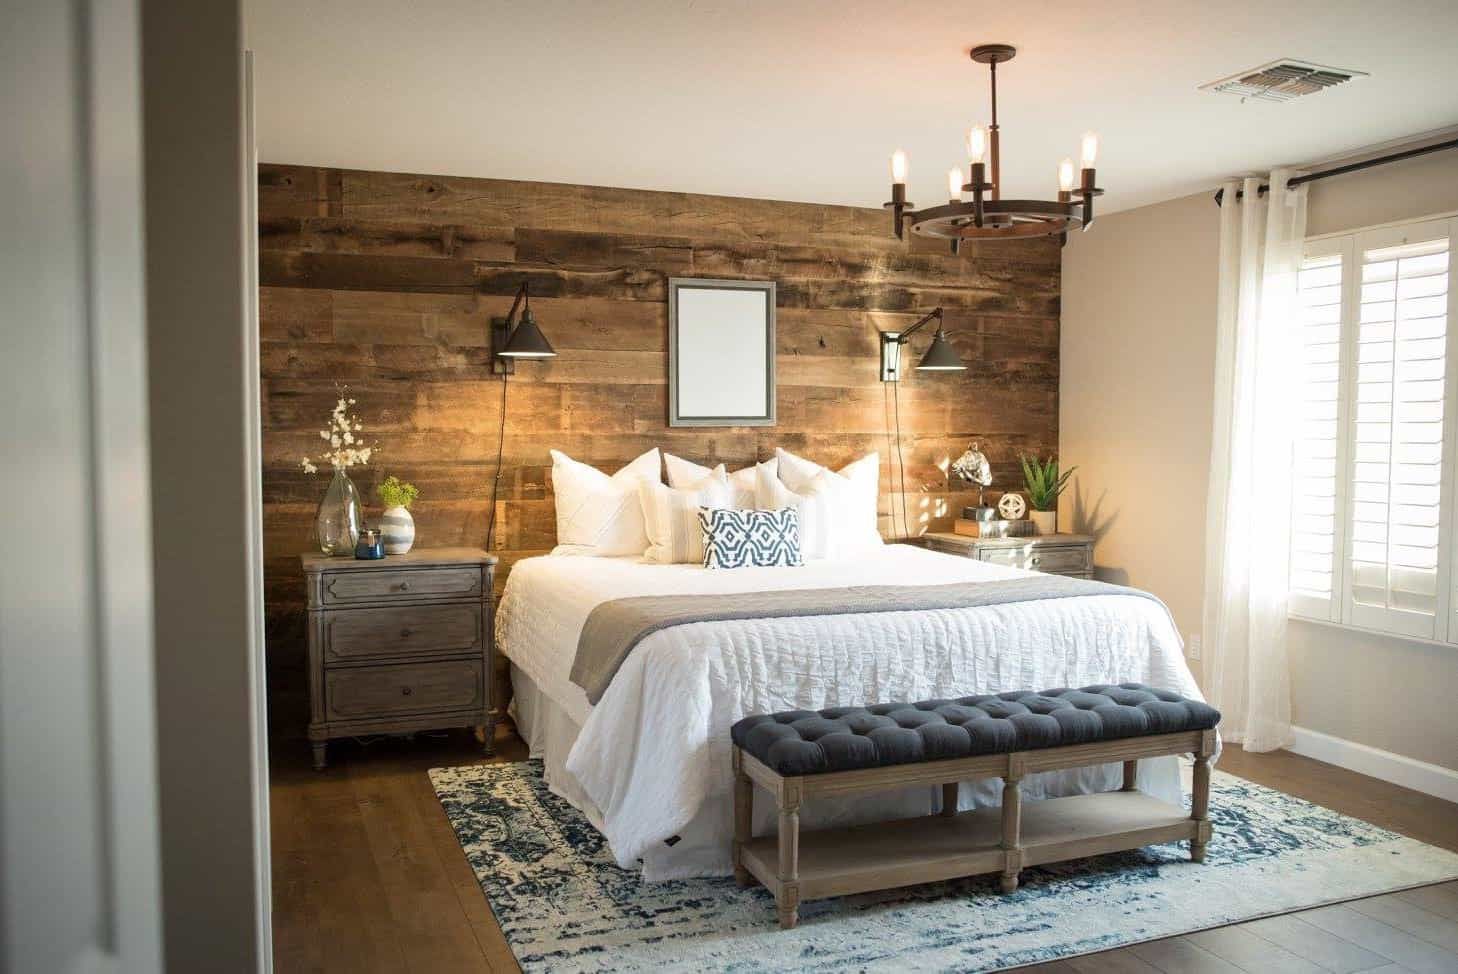 Wood Accent Wall Earth Tone Details For Vintage Bedroom Decor (View 4 of 10)